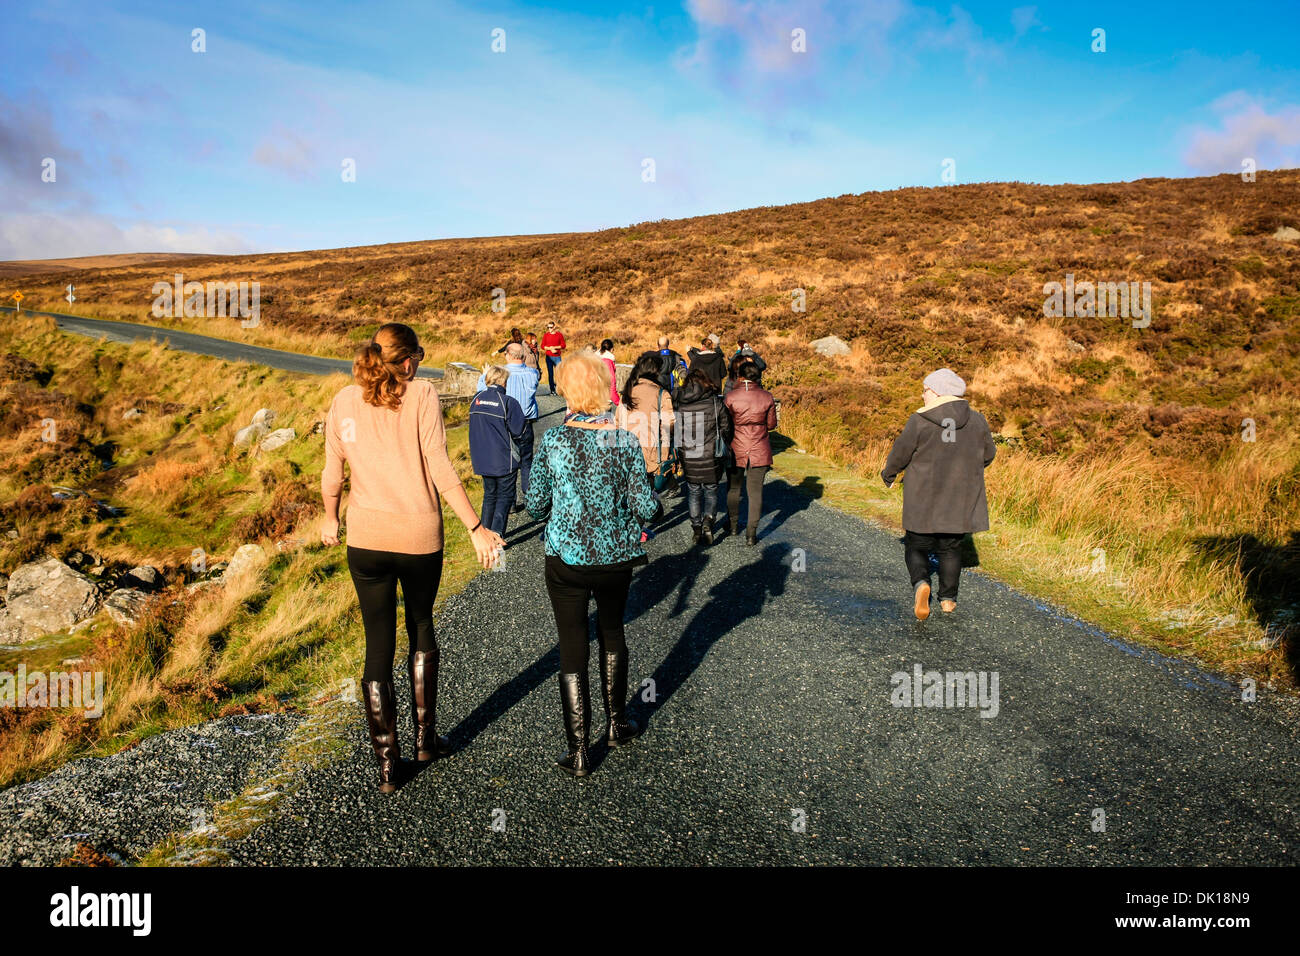 People walking on a high mountain road in Wicklow Eire Stock Photo